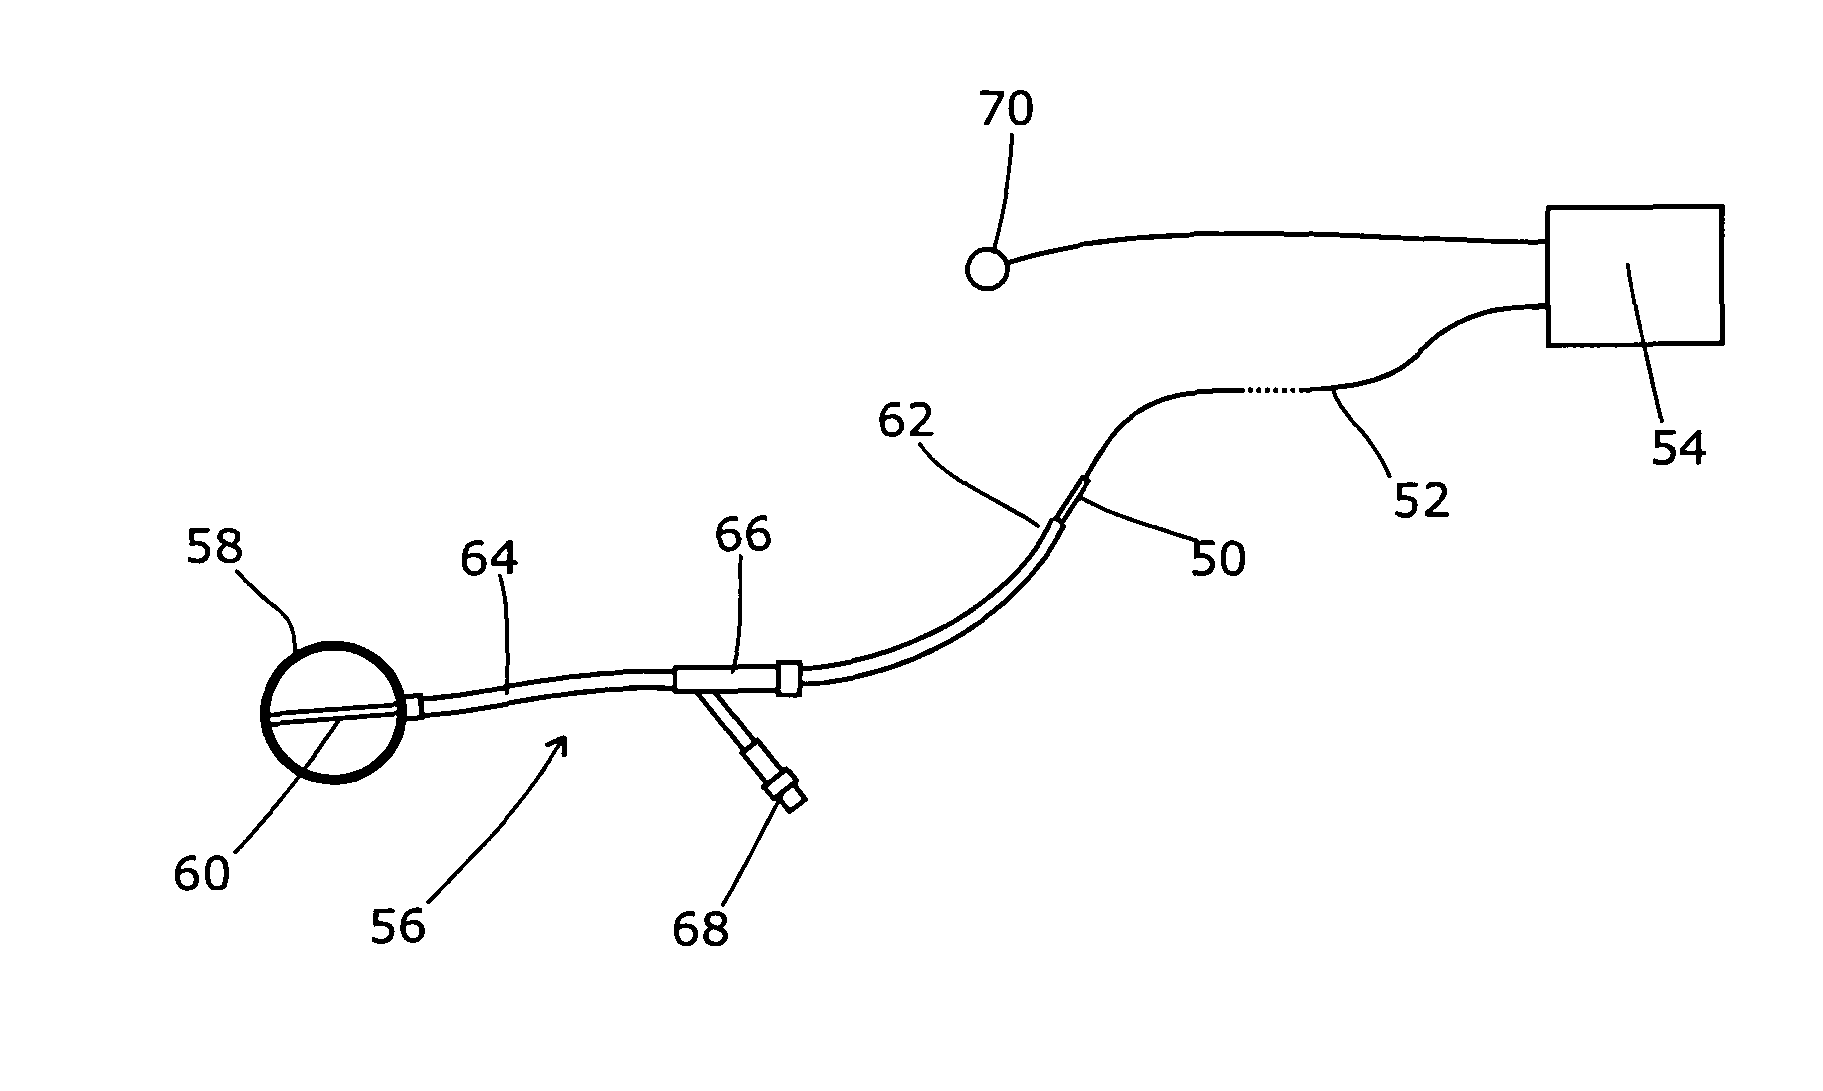 Apparatus for respiration state gated brachytherapy